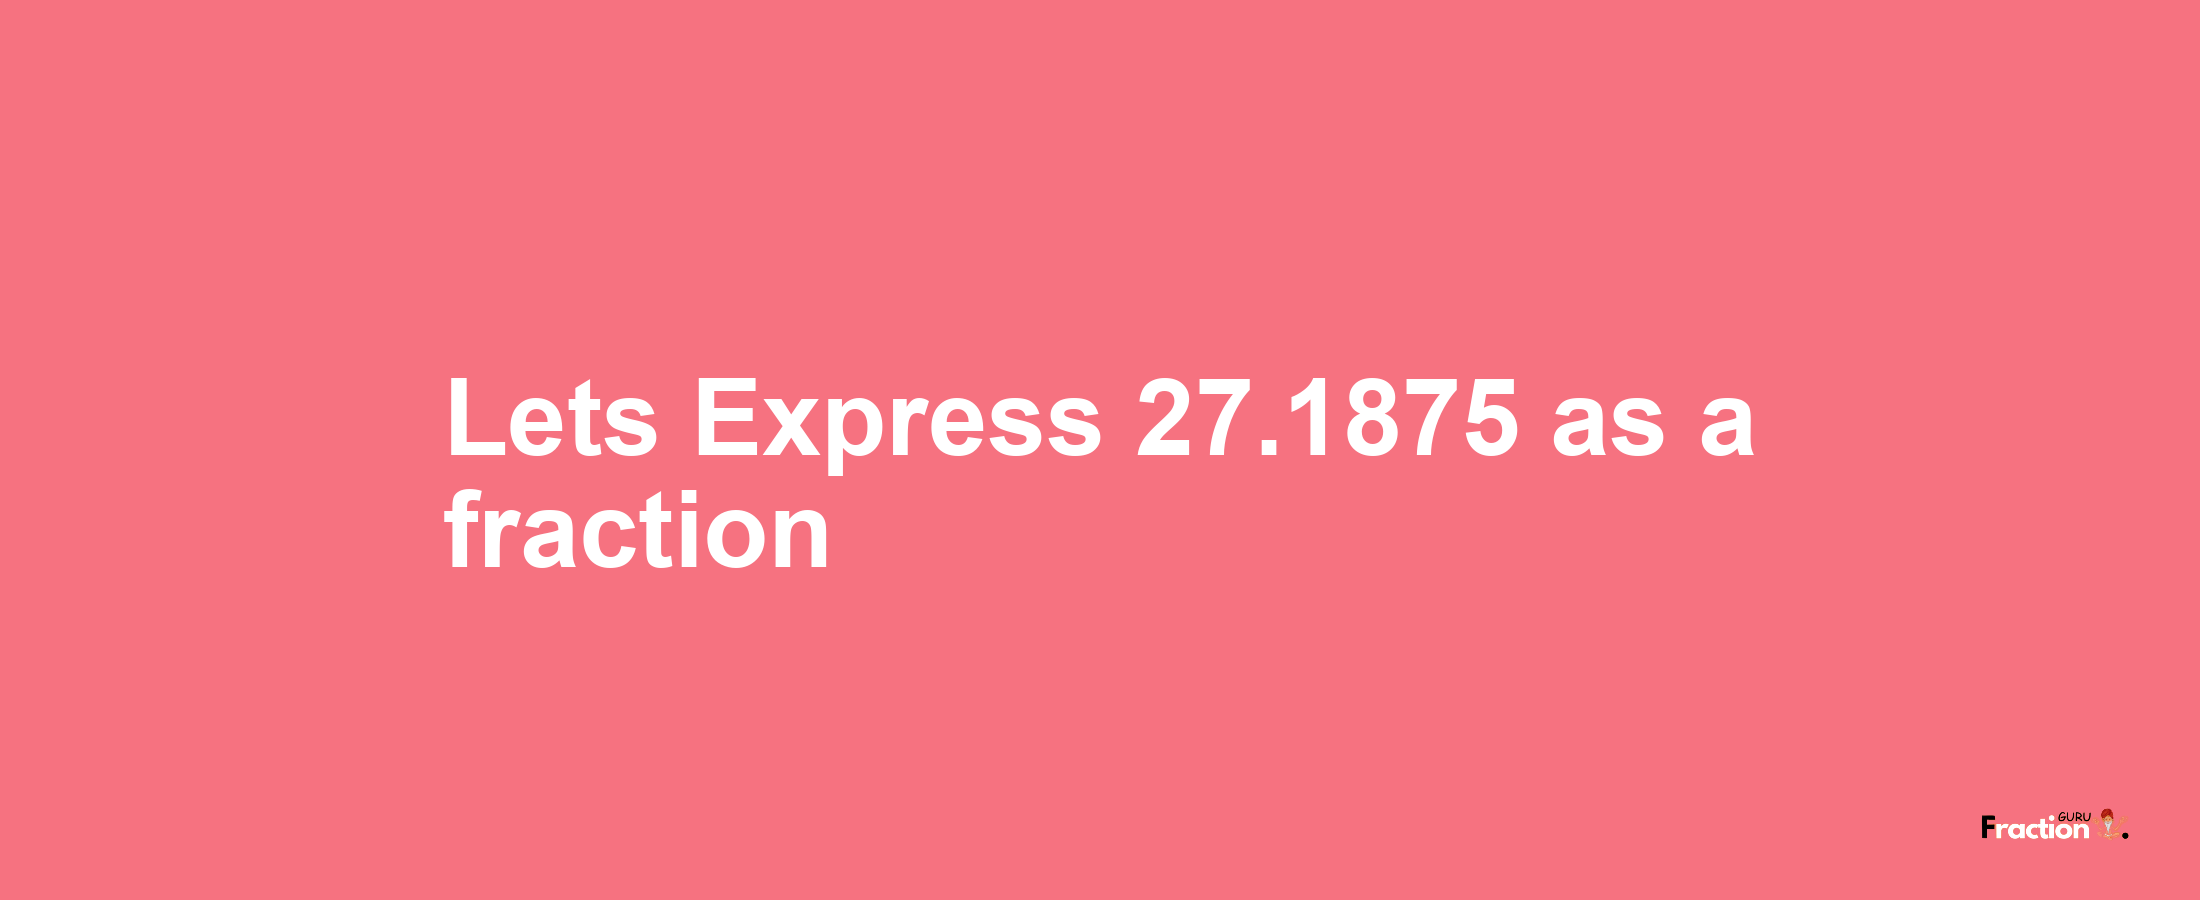 Lets Express 27.1875 as afraction